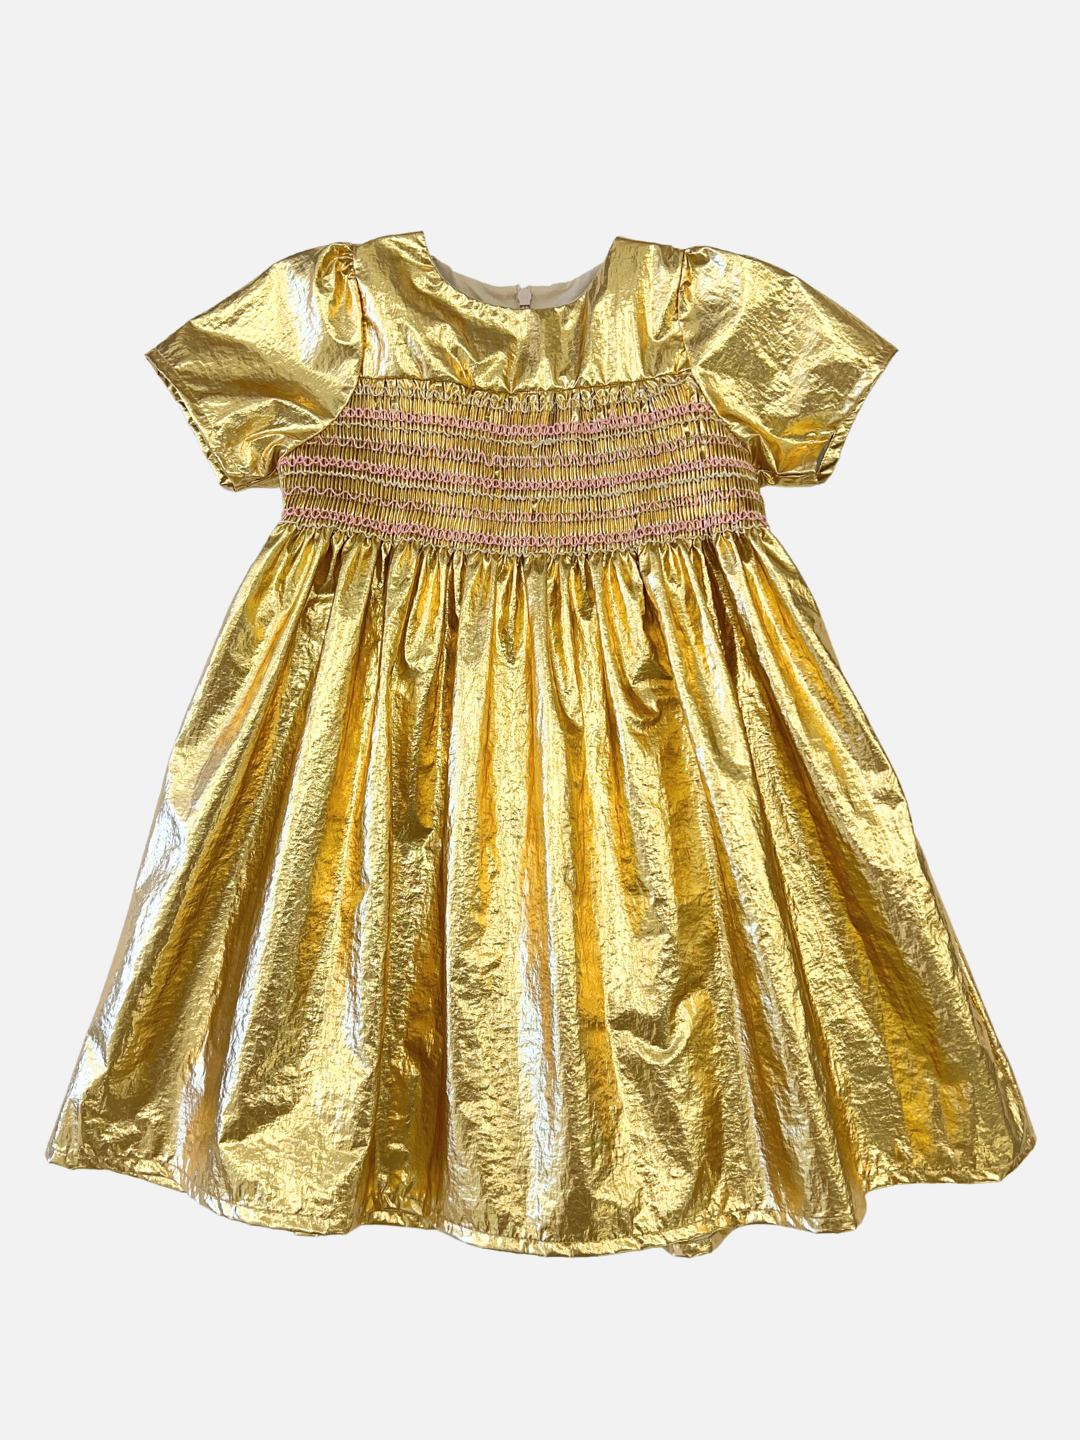 Gold | Kids party dress in yellow gold metallic fabric with a round neck, short sleeves, smocked bodice, empire waist and full skirt.